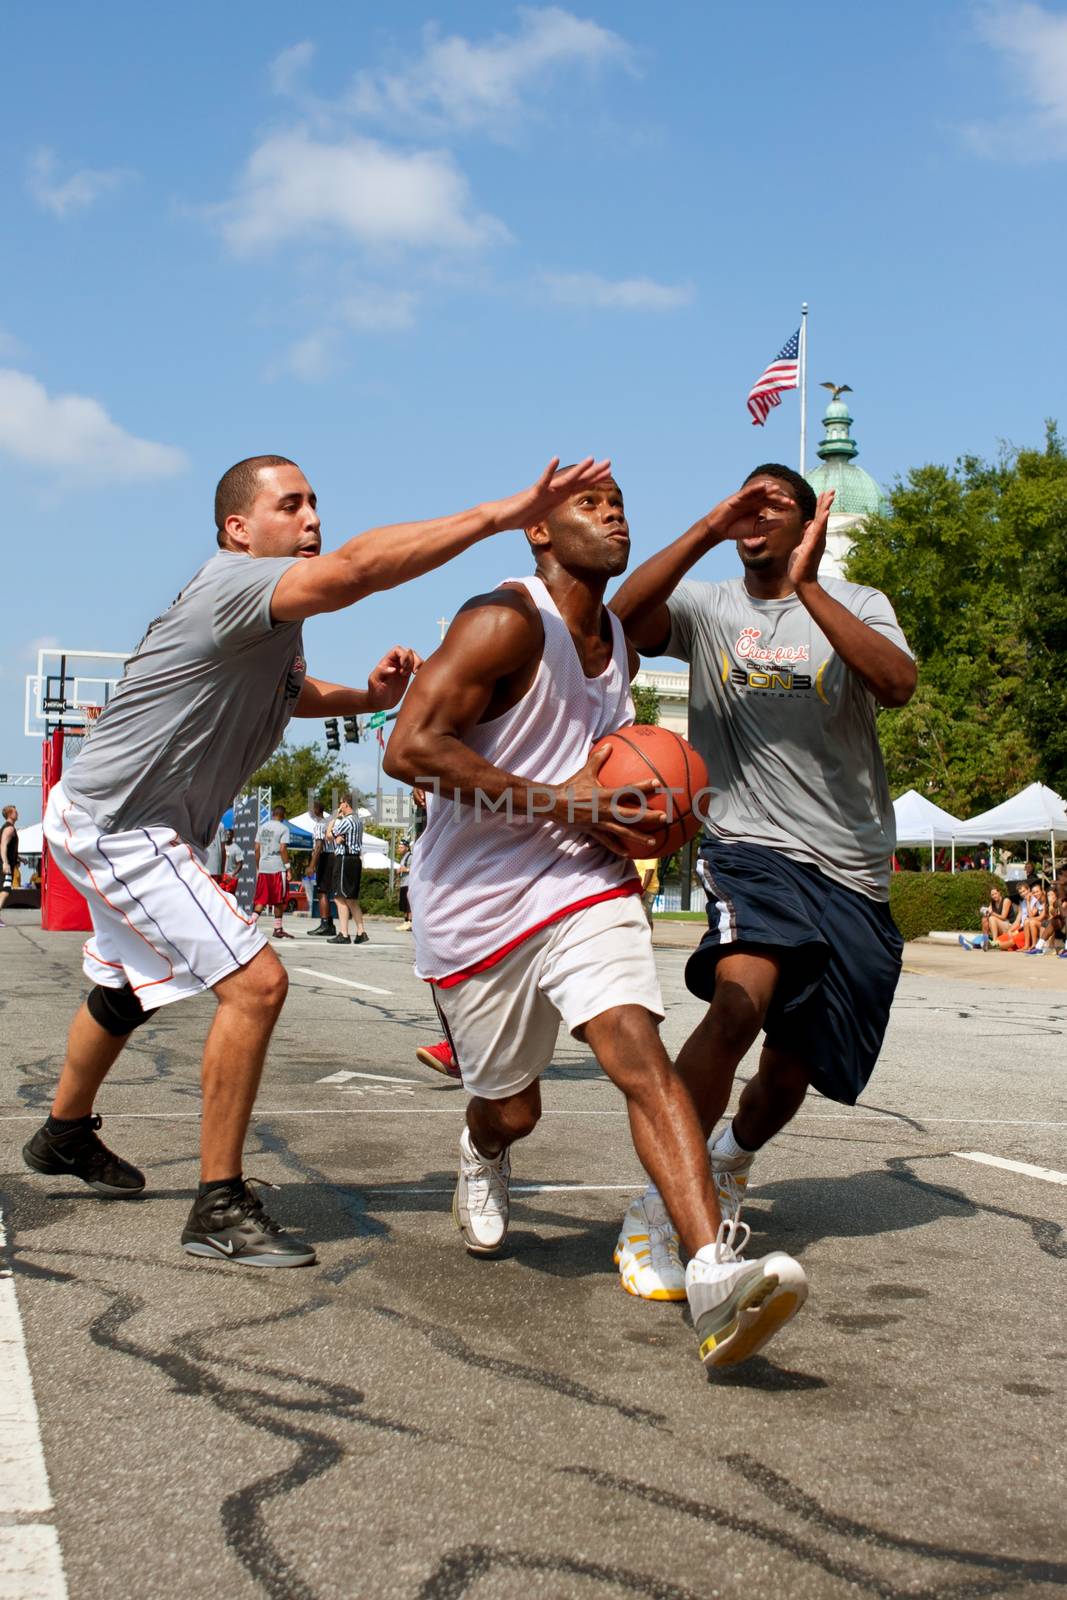 Man Drives To The Basket In Outdoor Street Basketball Tournament by BluIz60